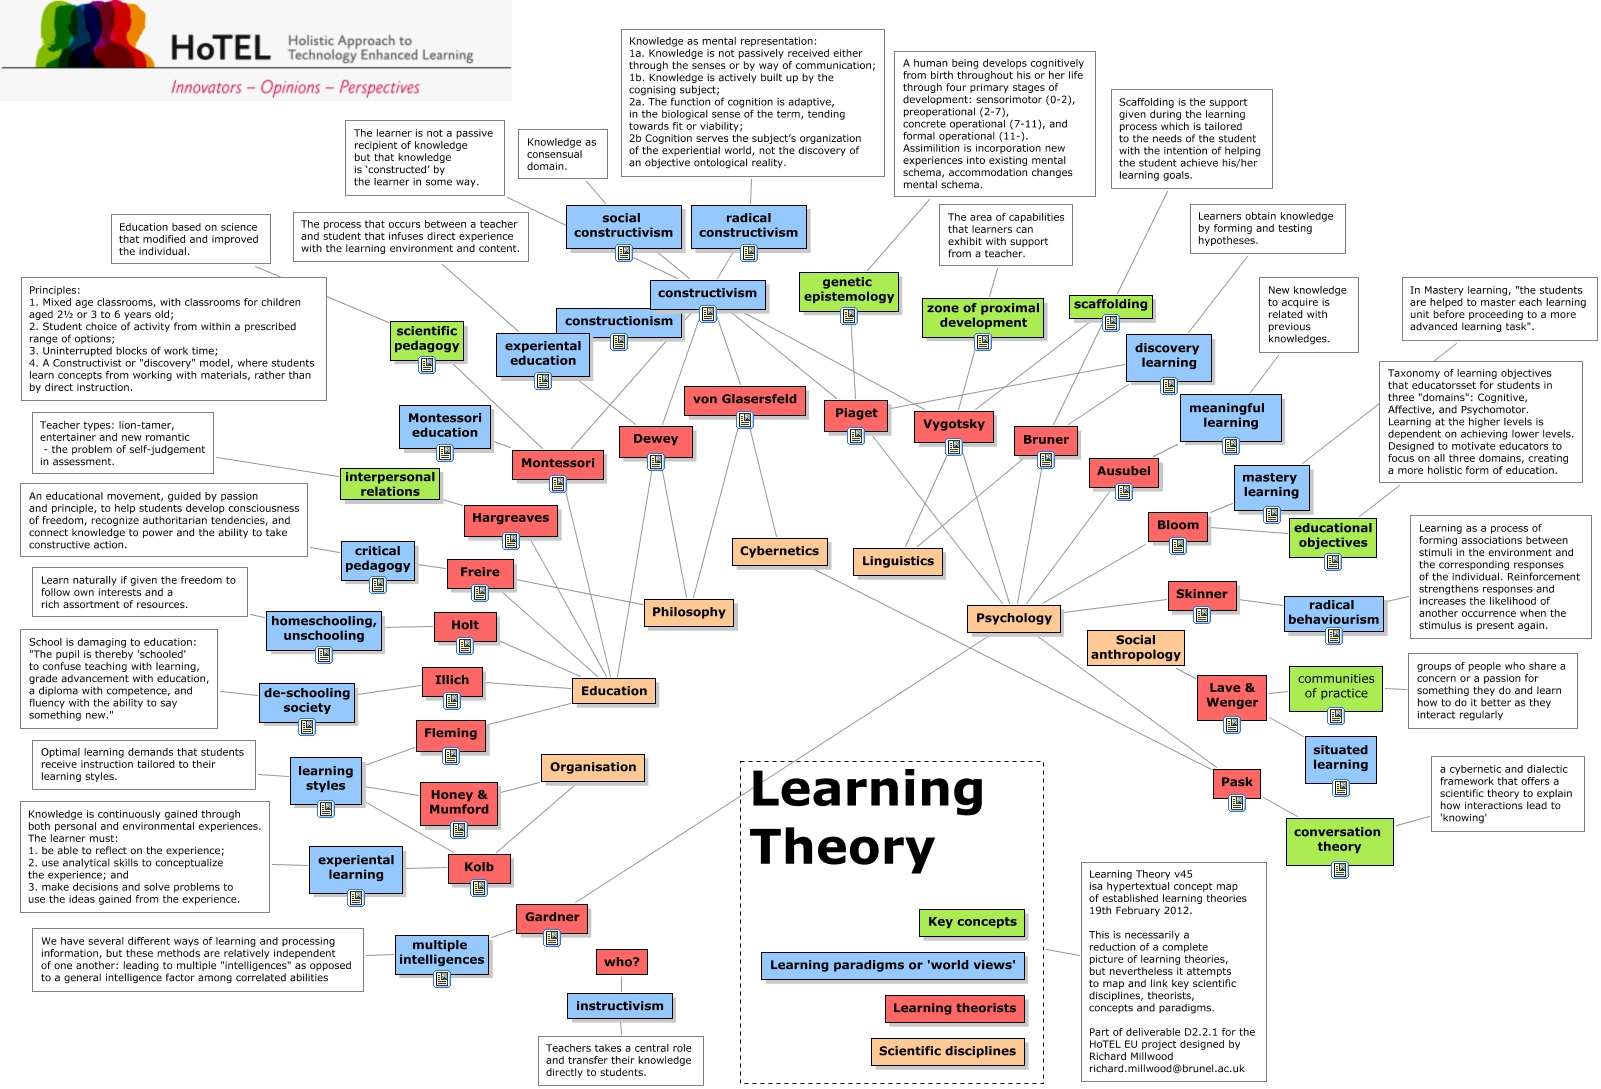 The new social learning blog: How our learning theories shape how we ...